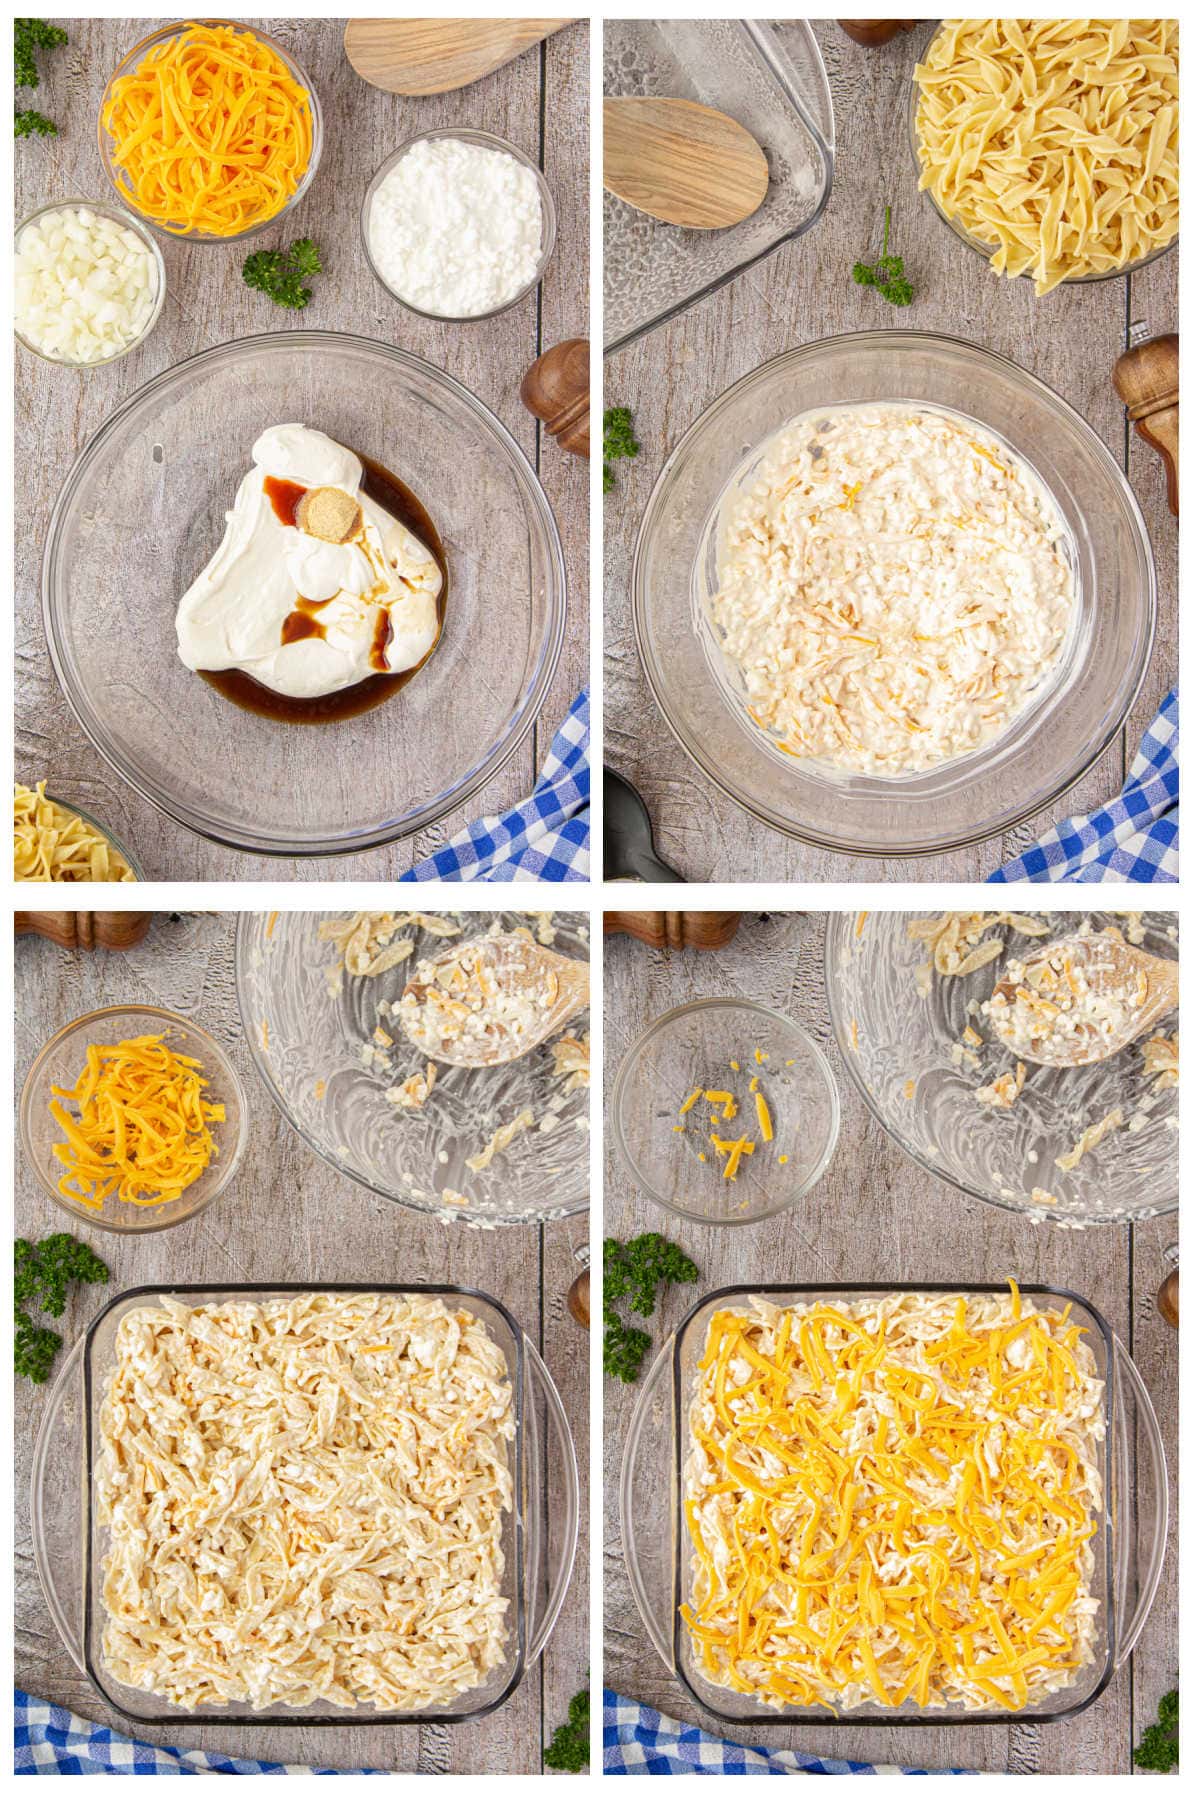 Collage of step by step images showing how to make this recipe.